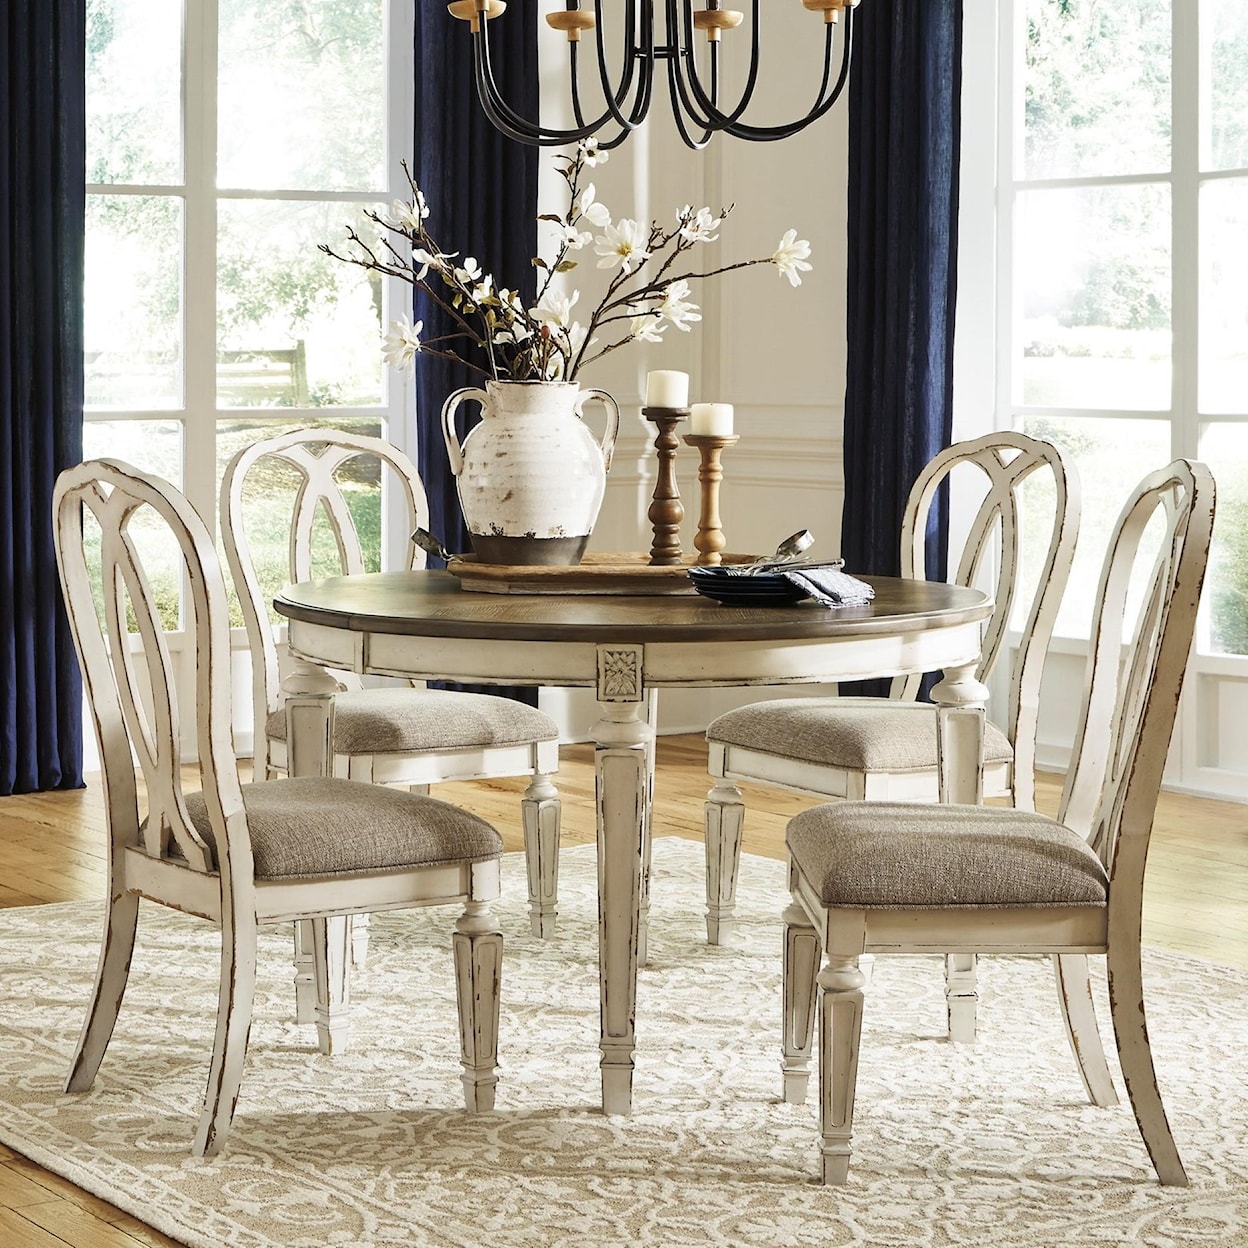 Michael Alan Select Realyn 5-Piece Table and Chair Set